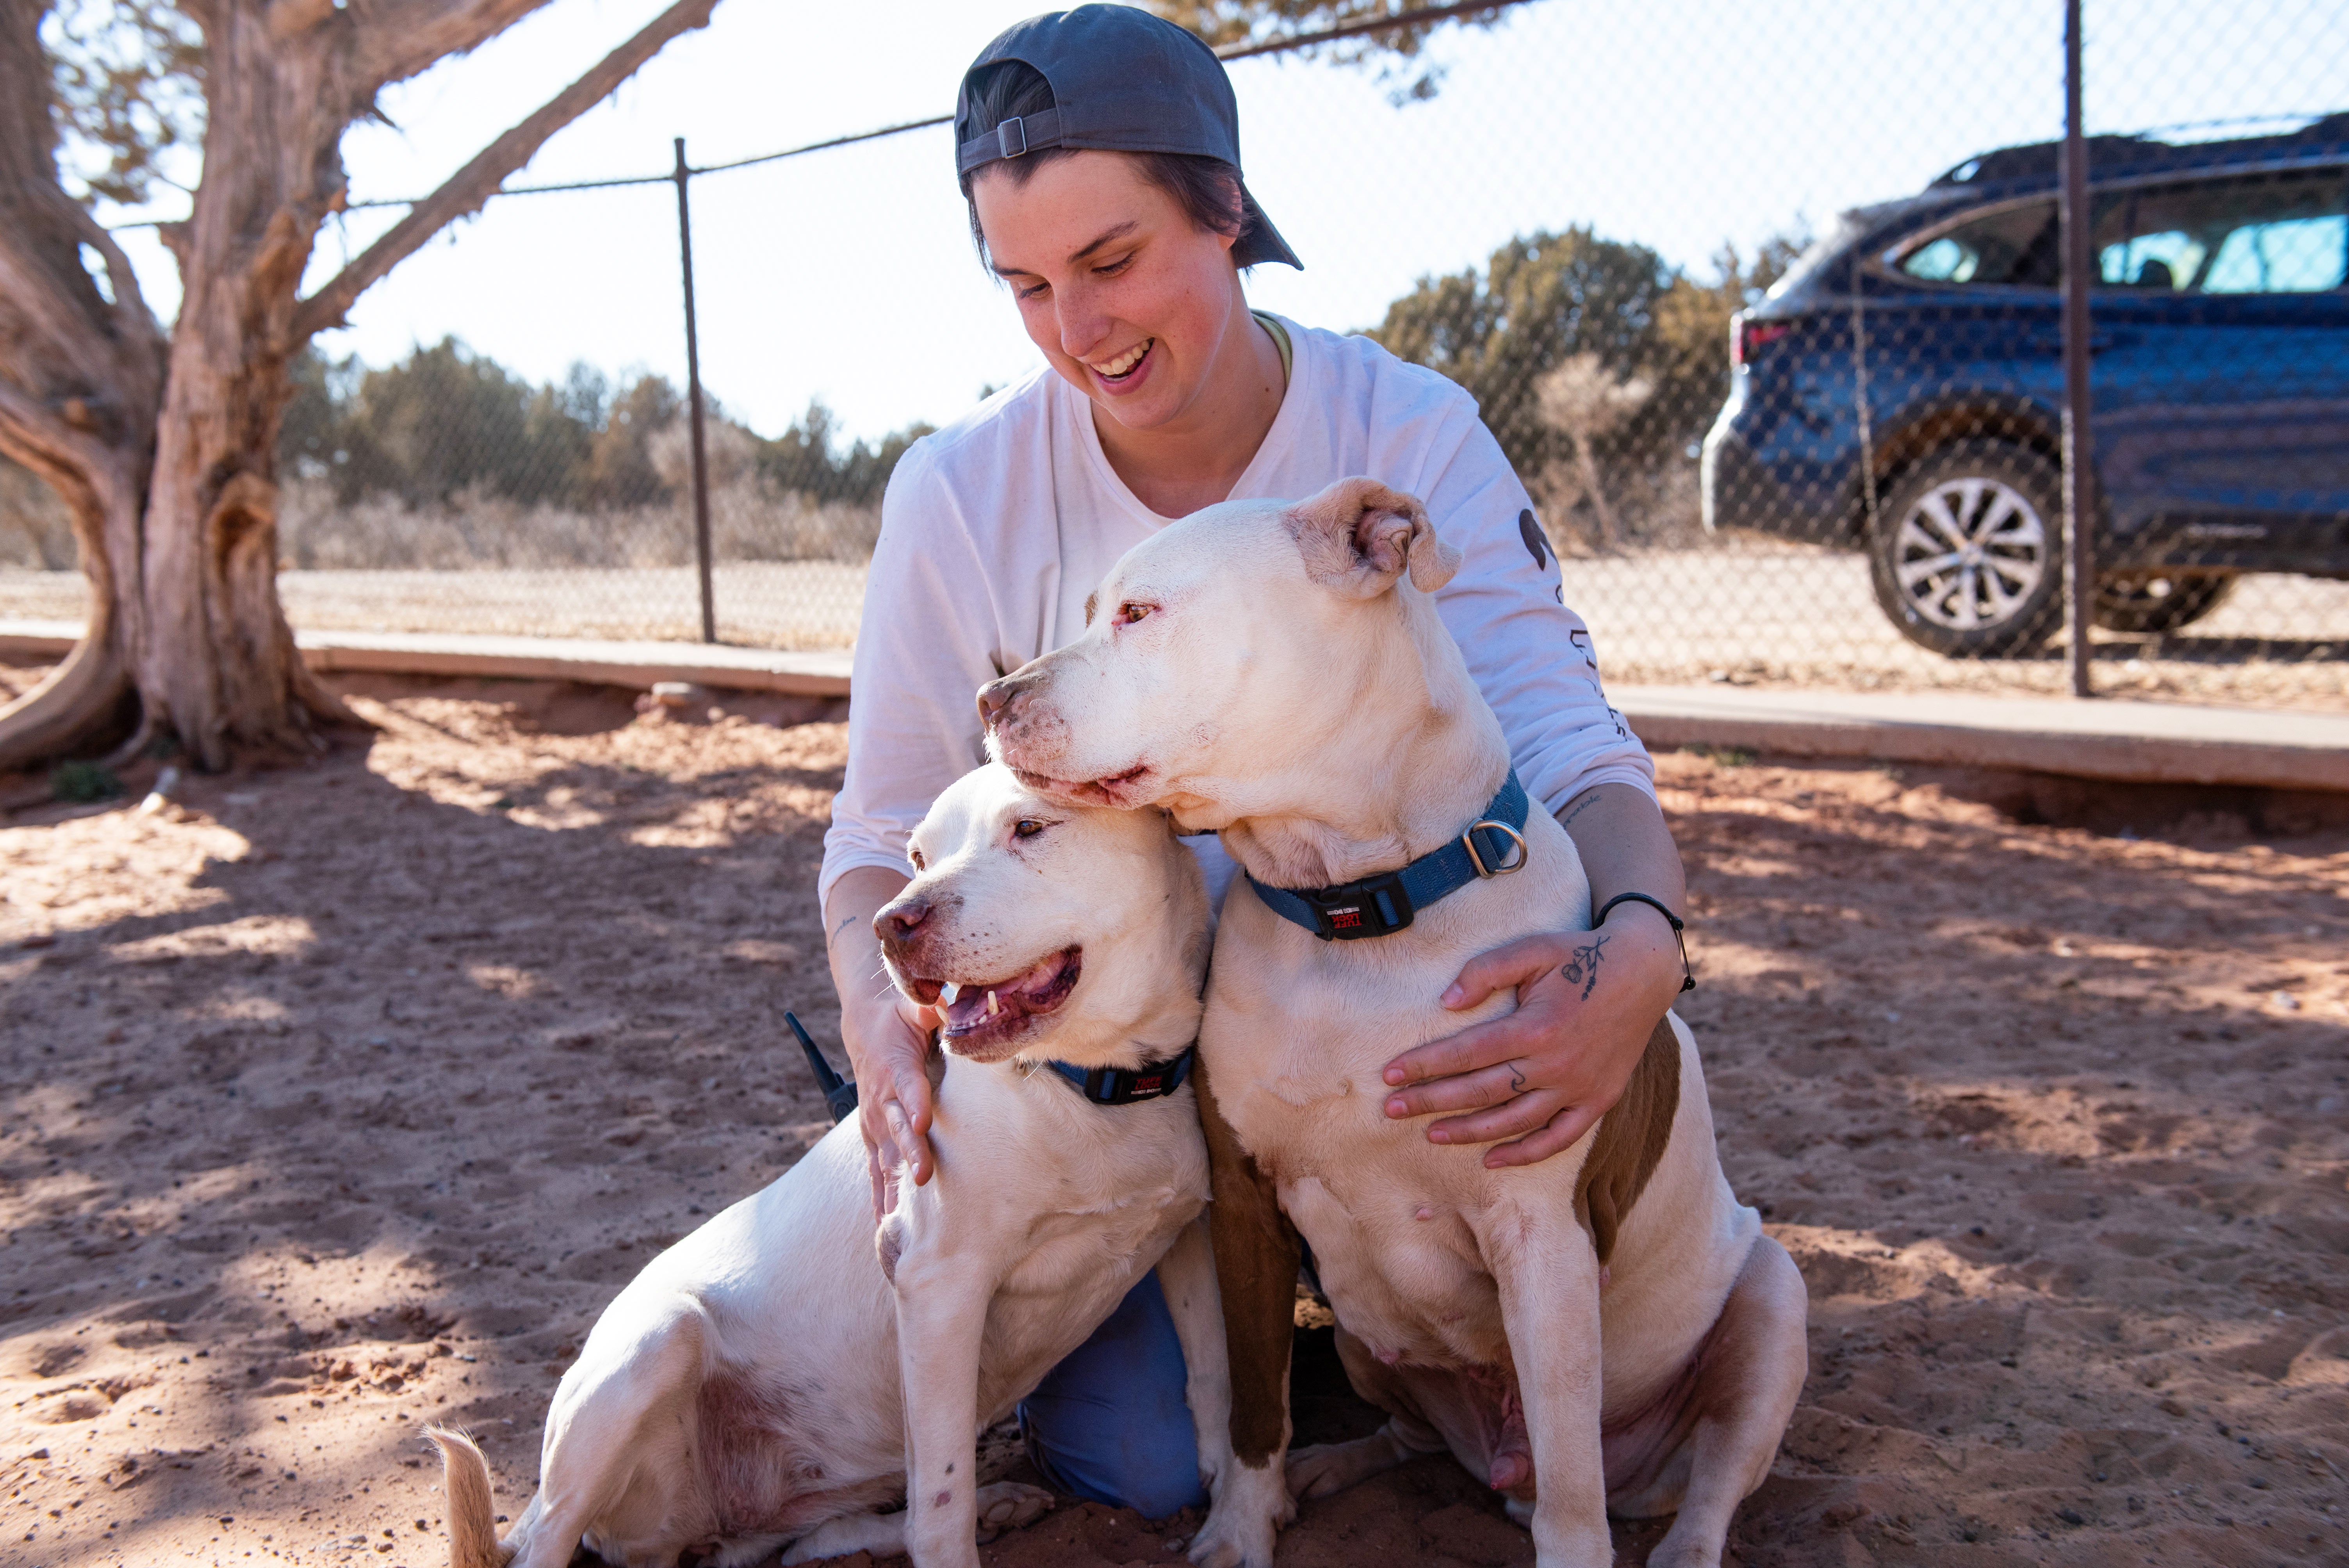 Person hugging two white pit bull type dogs in a fenced area